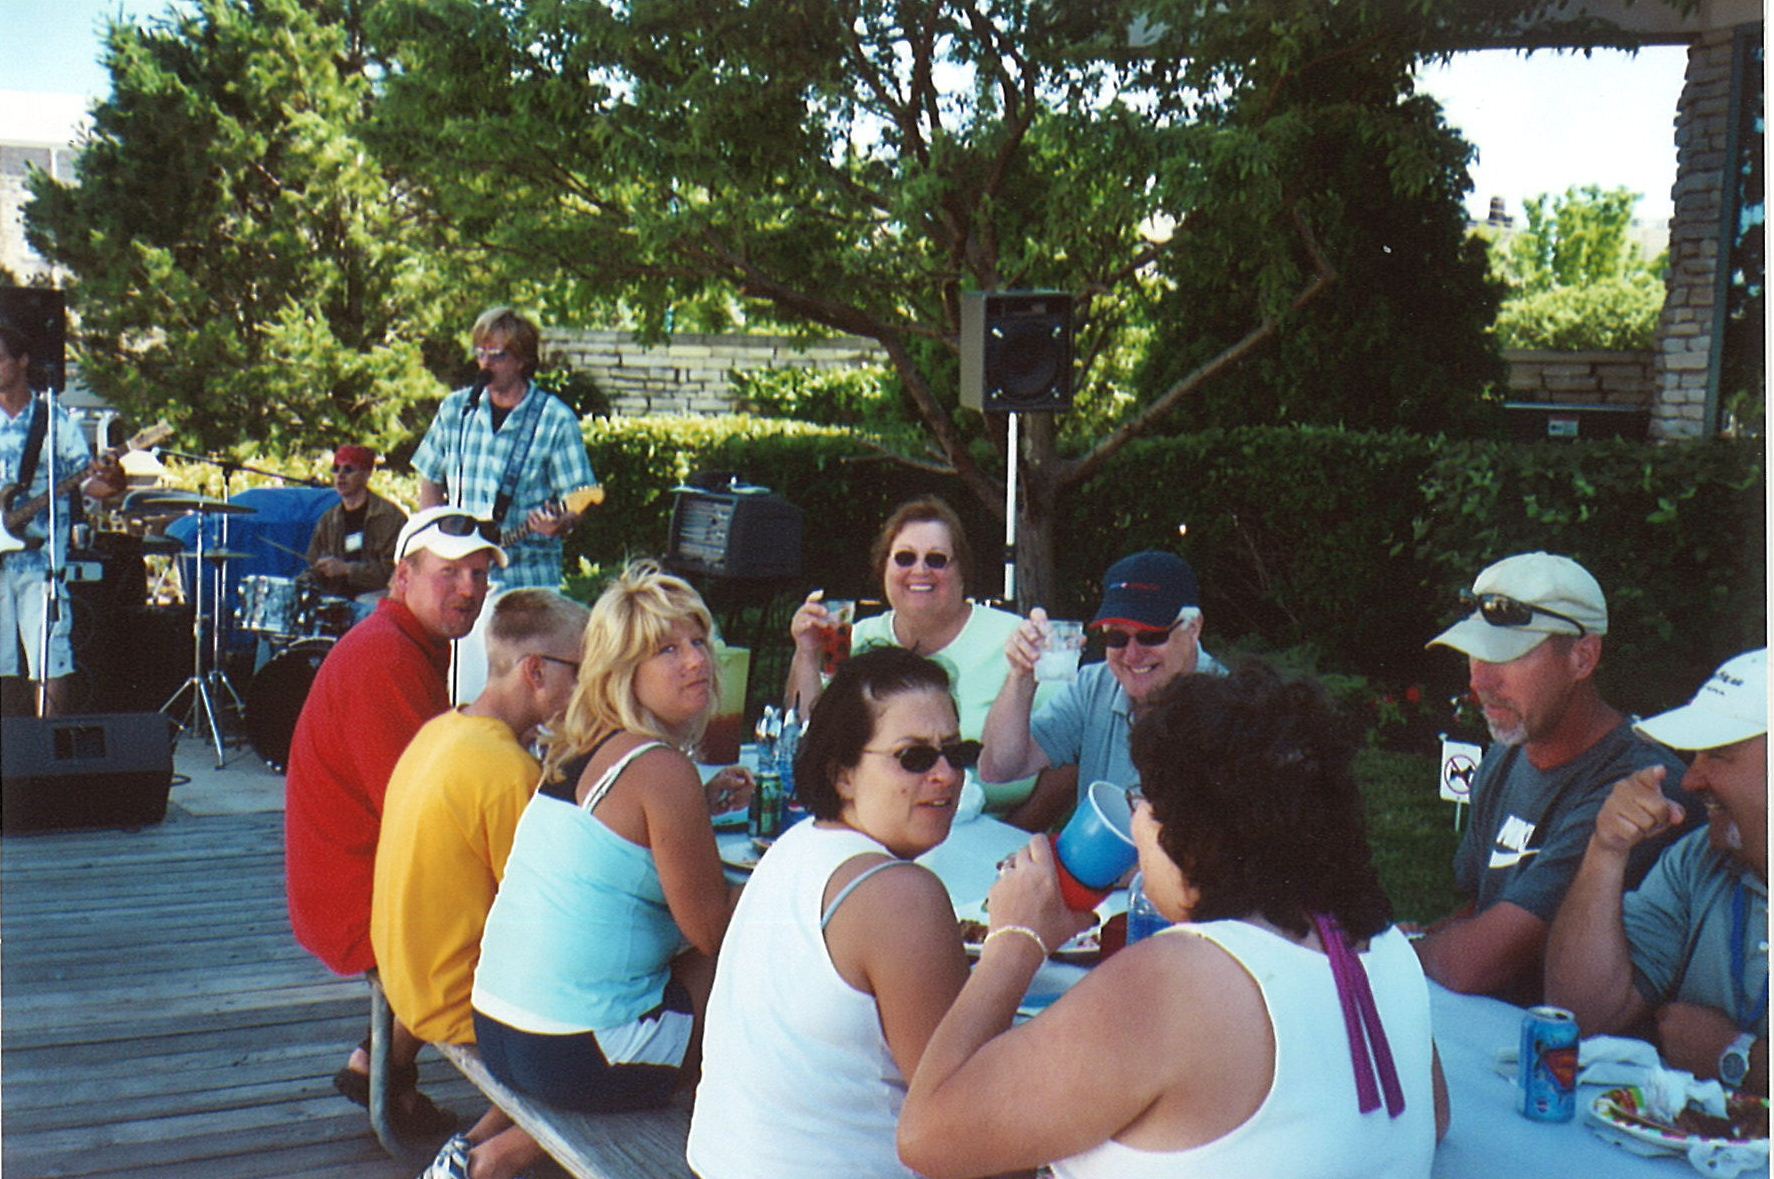 People eating and talking at picnic table